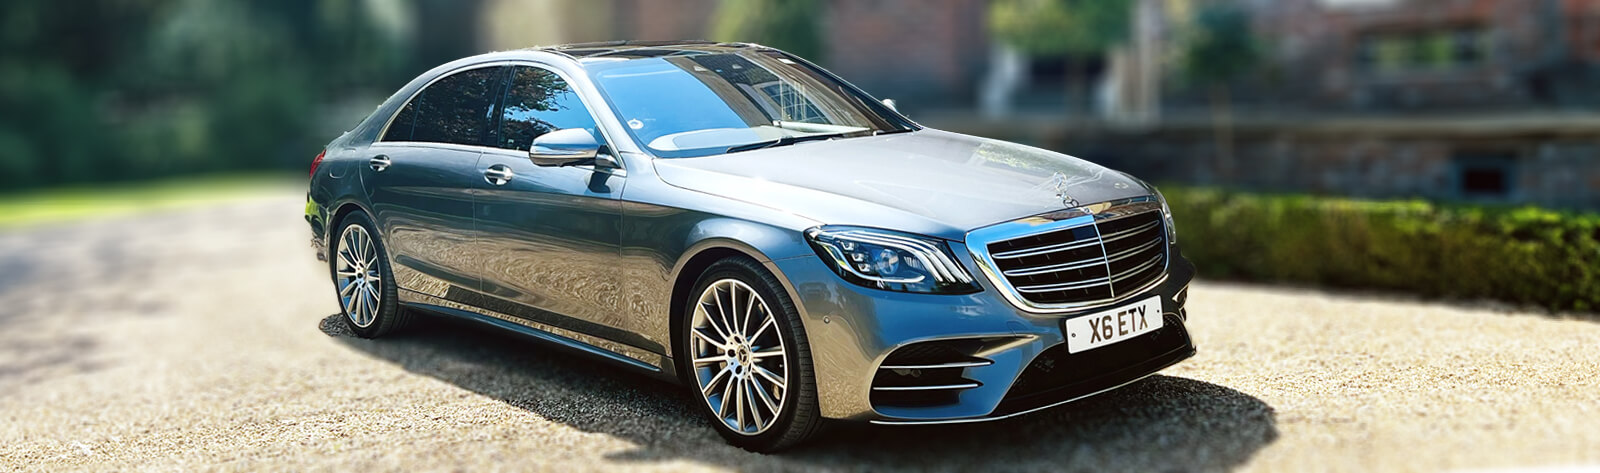 mercedes v class and mercedes s class Mere